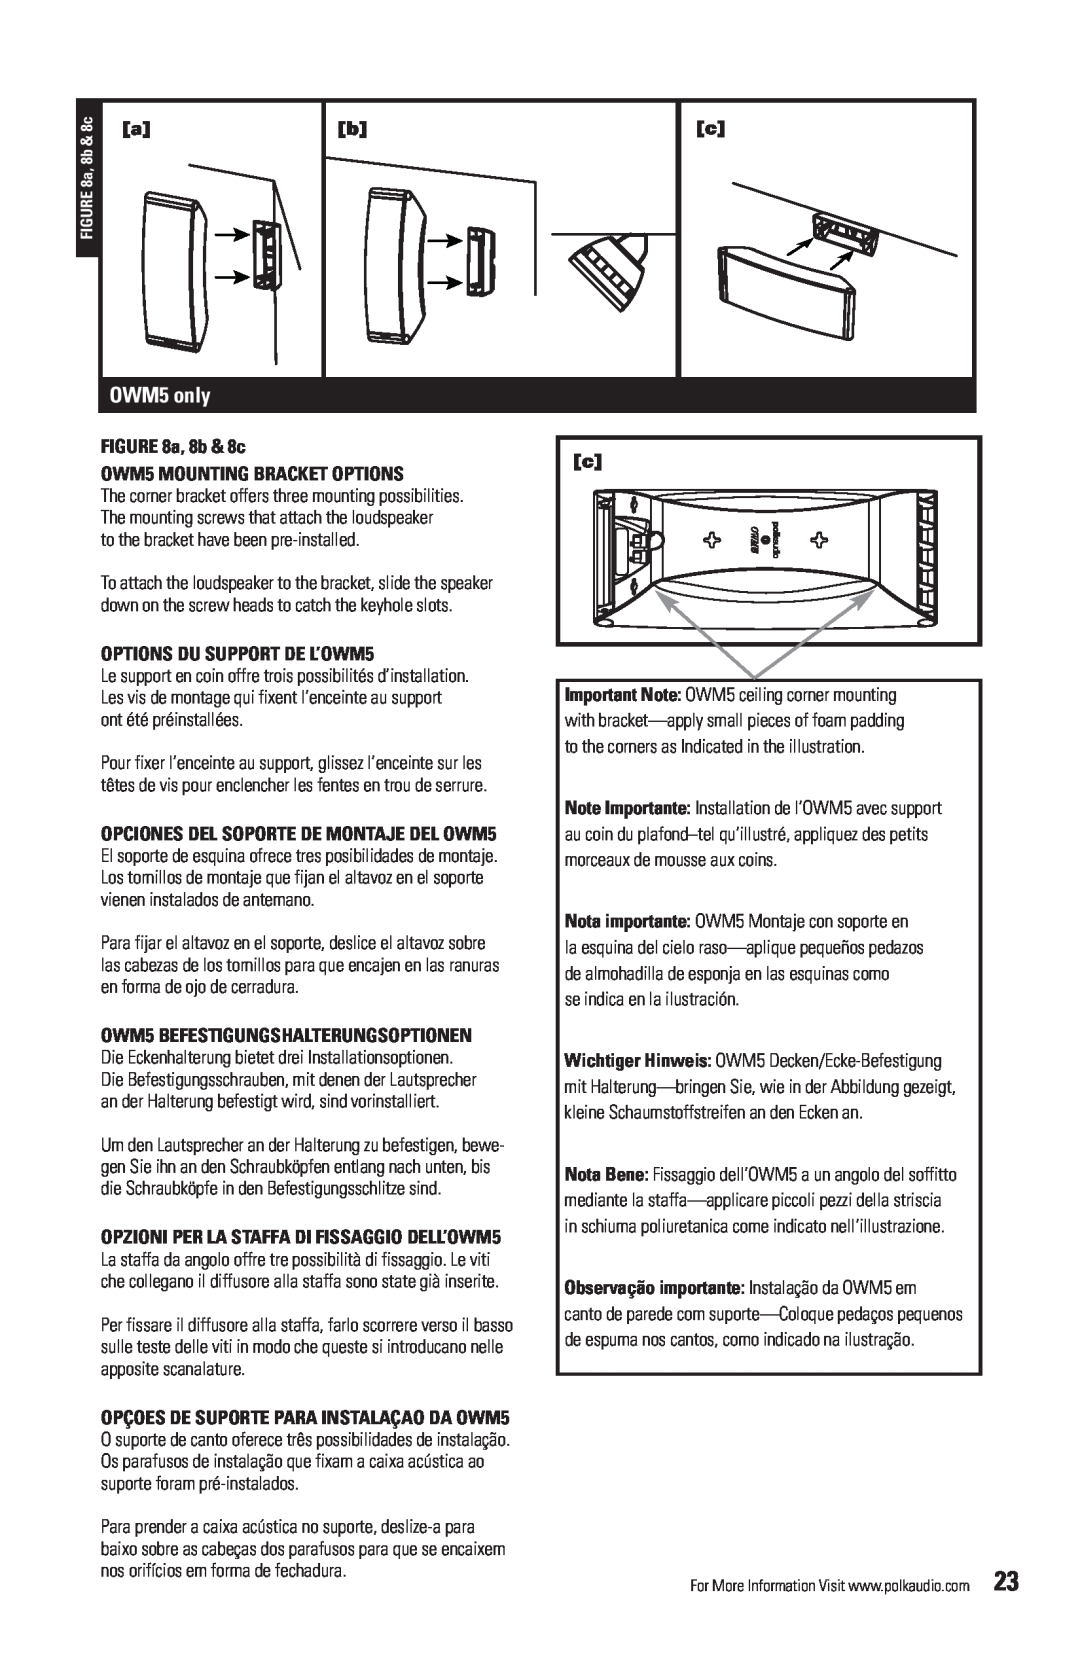 Polk Audio OWM3 owner manual OWM5 only, a, 8b & 8c OWM5 MOUNTING BRACKET OPTIONS, OPTIONS DU SUPPORT DE L’OWM5 